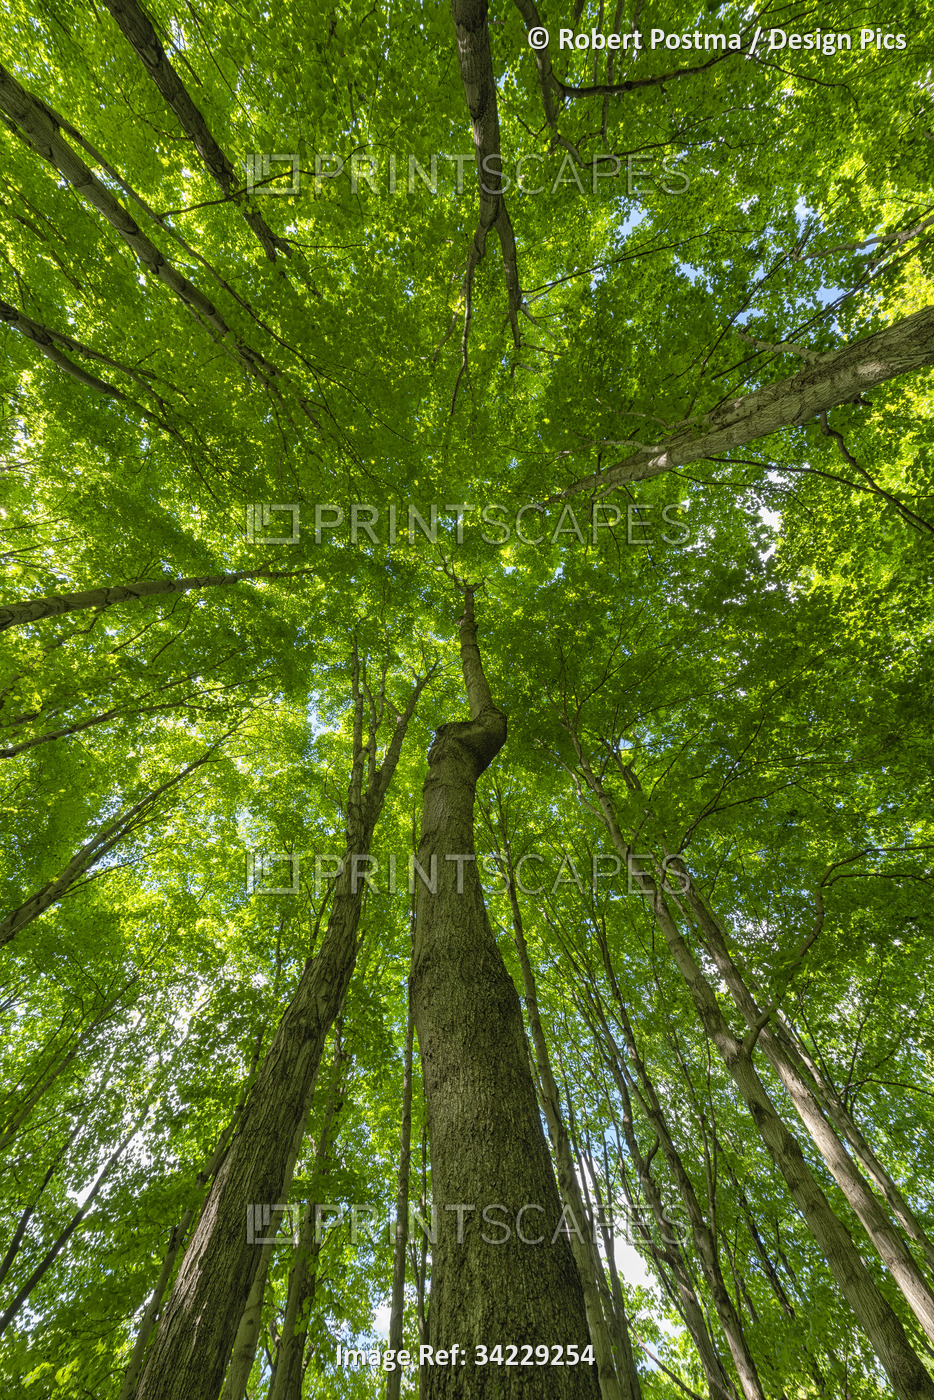 The beautiful summer foliage in the forests of Ontario become a vibrant green ...